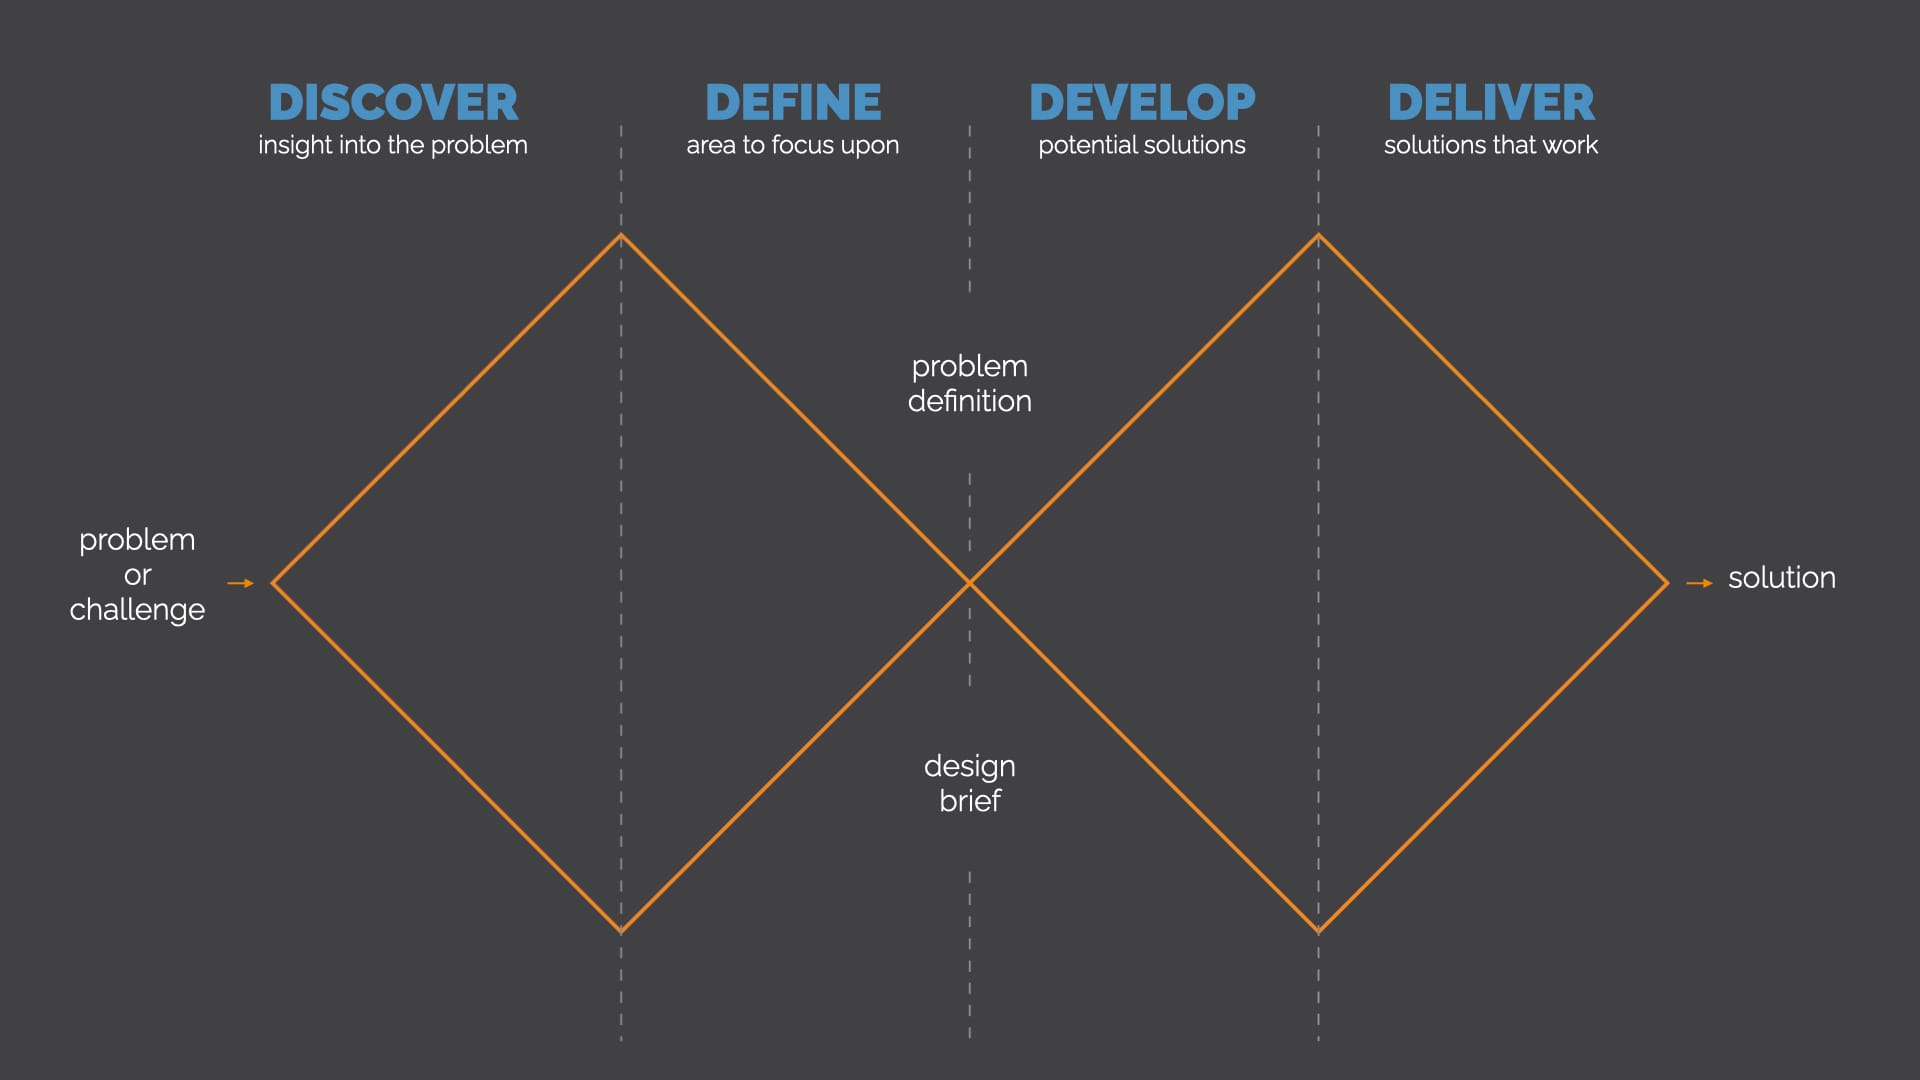 The Service Design Process, also known as the Double Diamond. It shows the four phases of service design, Discover, Define, Develop, and Deliver.